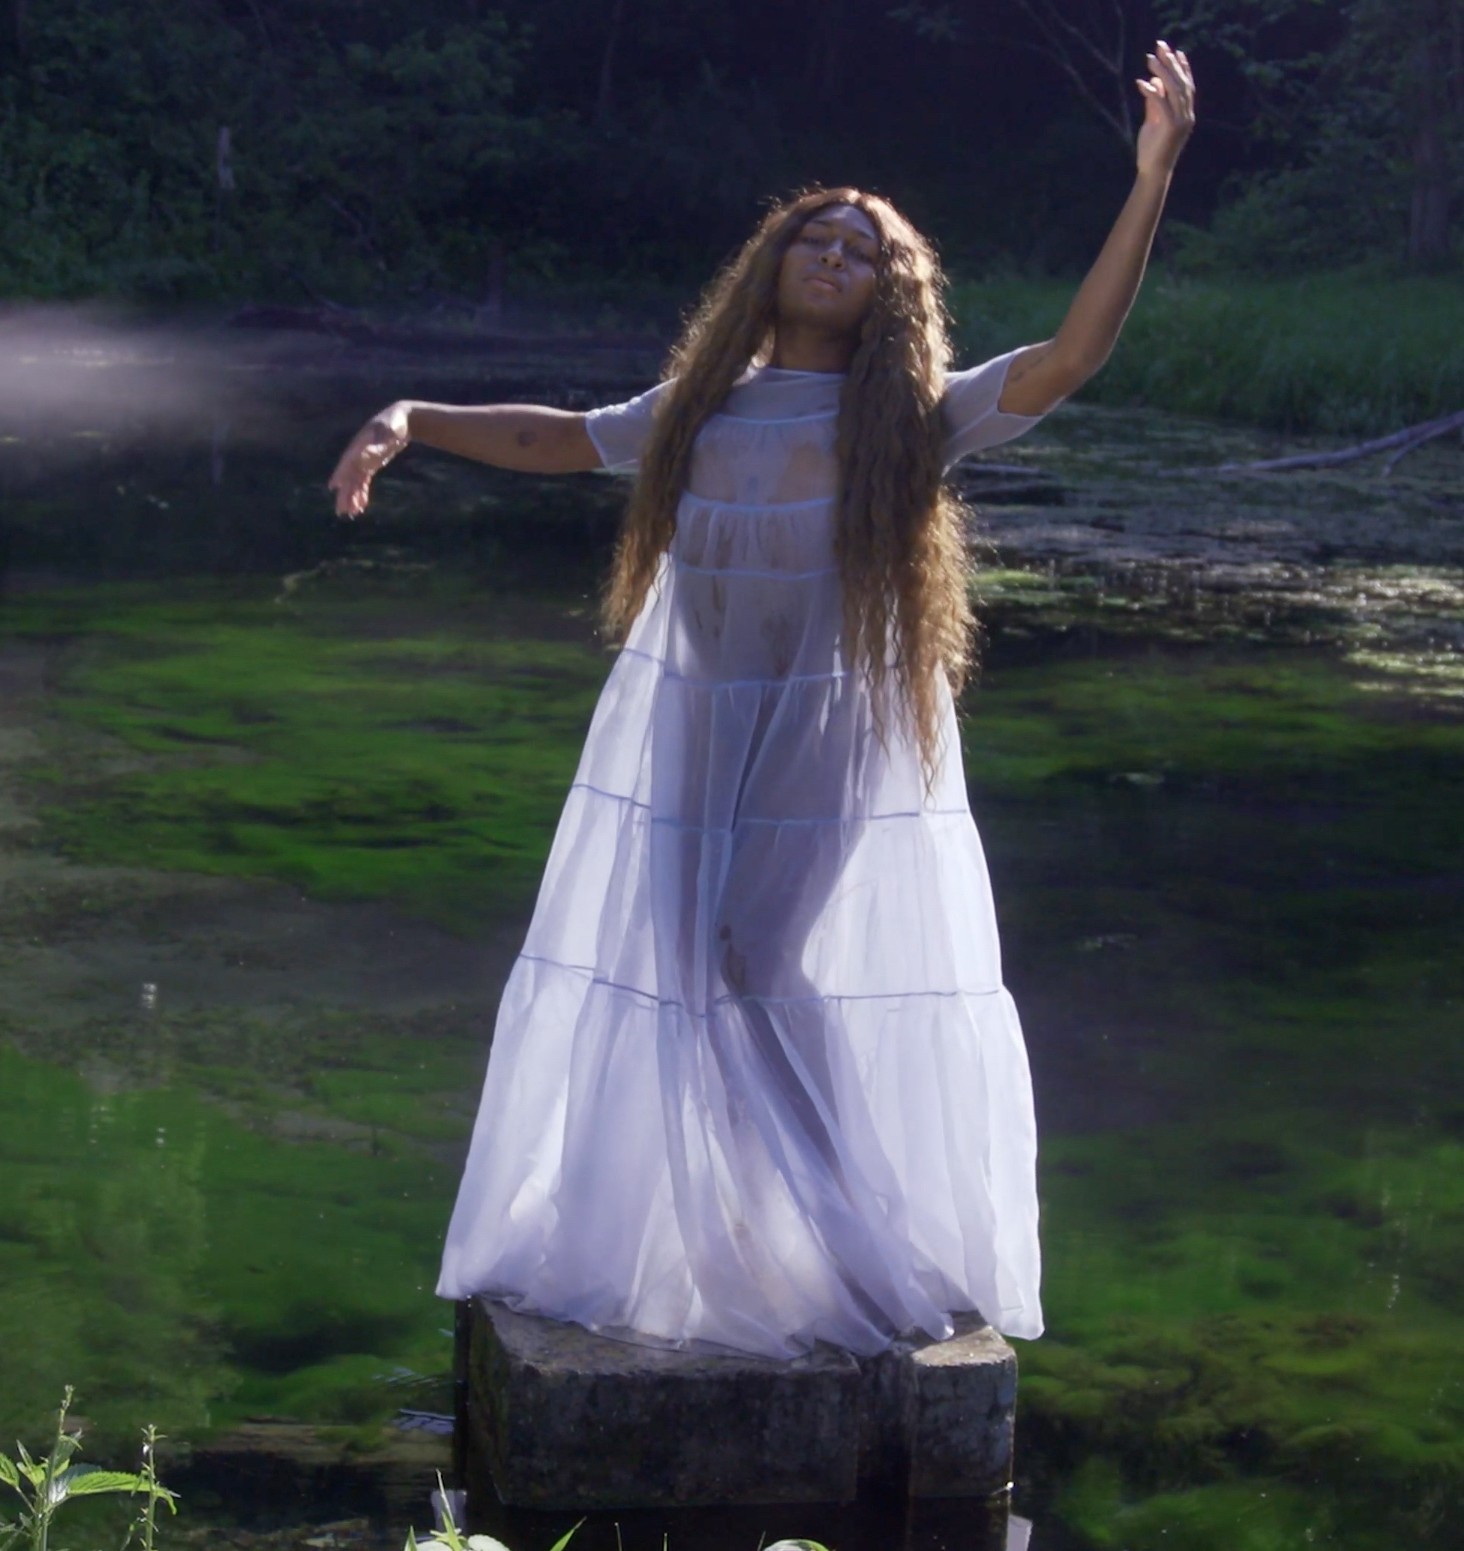 In this film still from Christopher Sonny Martinez's Come Hell or High Femmes (2021), Keioui Keijaun Thomas stands with her long hair down on a stone platform over moss, wearing a floor length gauzy dress, with one arm extended above her head and her other extended to the side.